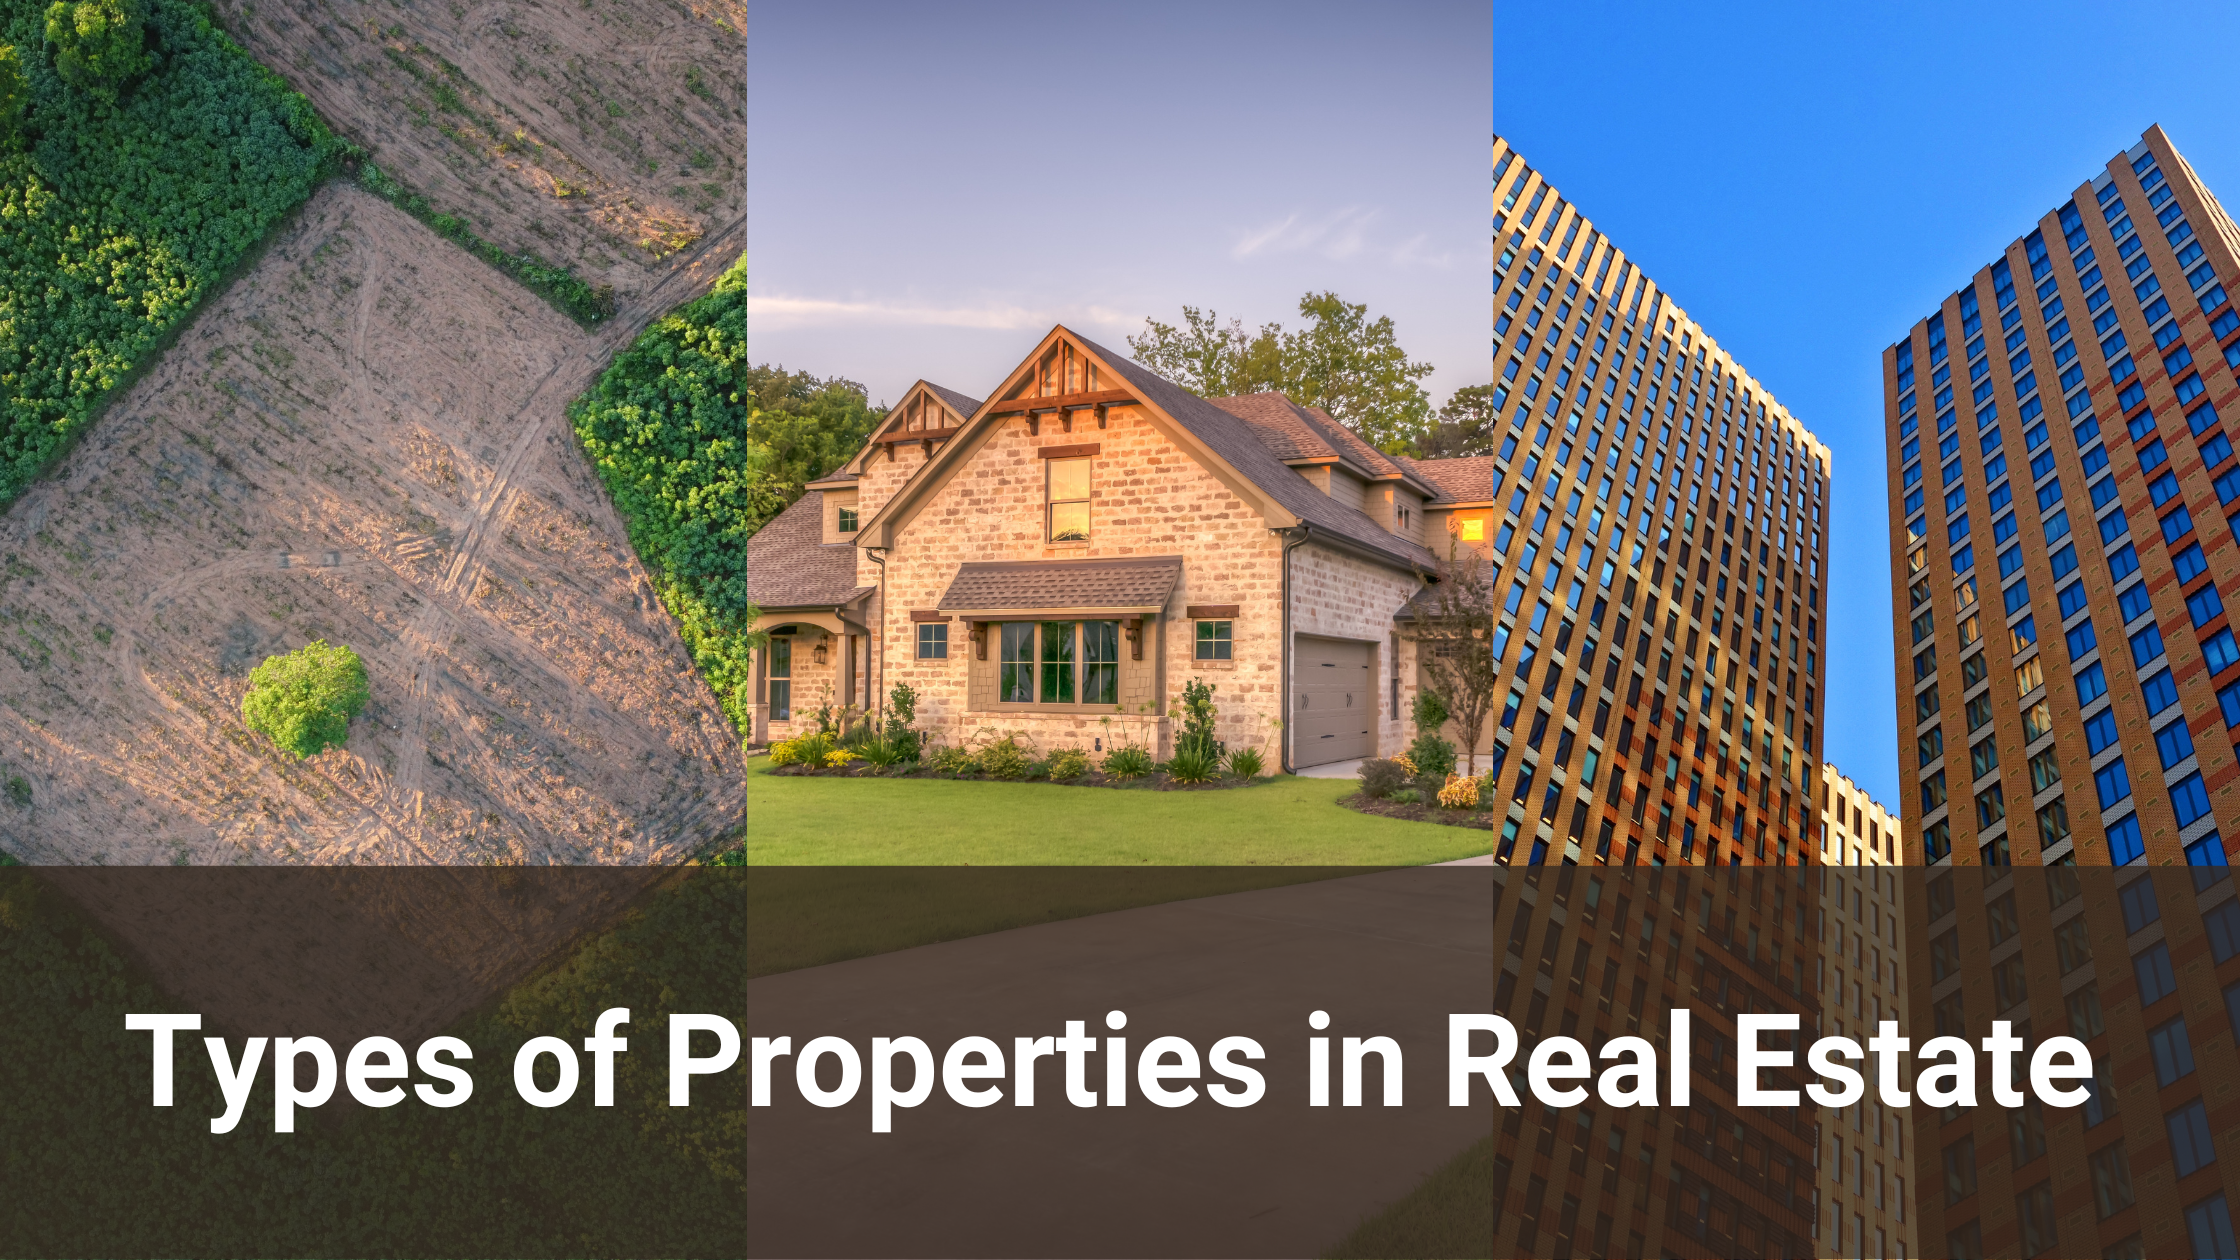 Types of Properties in Real Estate